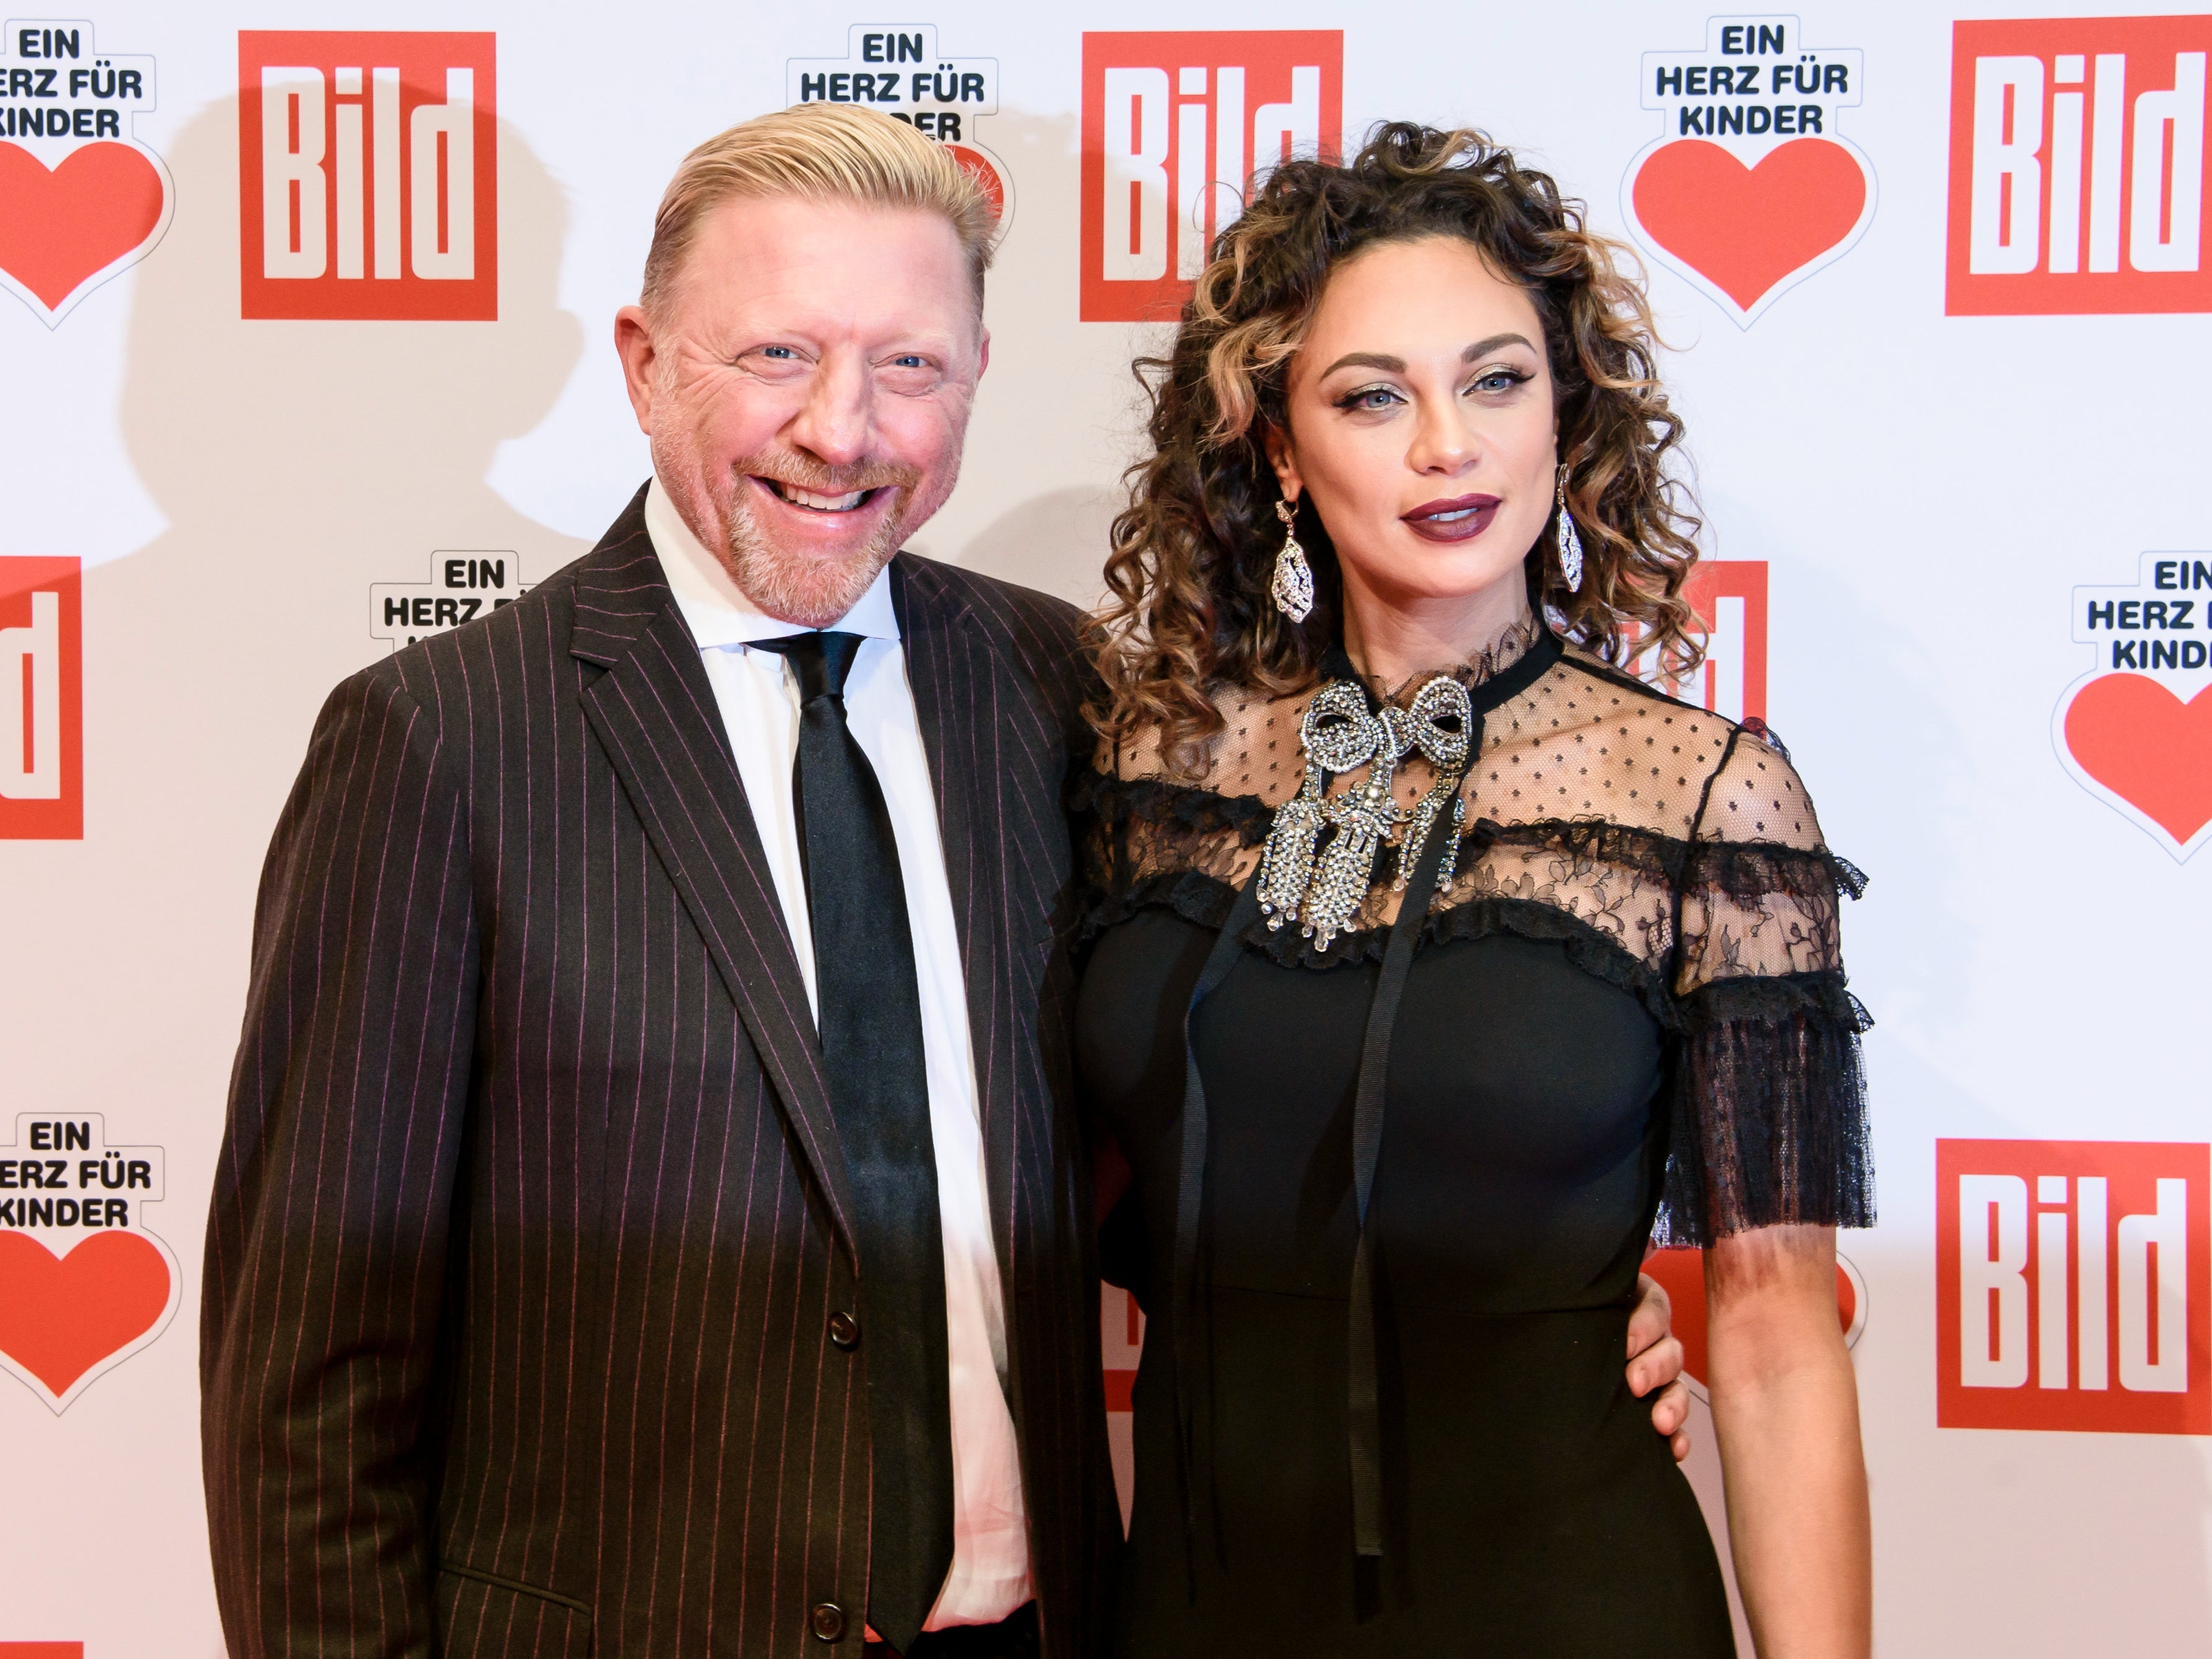 Boris Becker’s estranged wife Lilly Becker has said he is ‘doing as well as he can be’ in prison